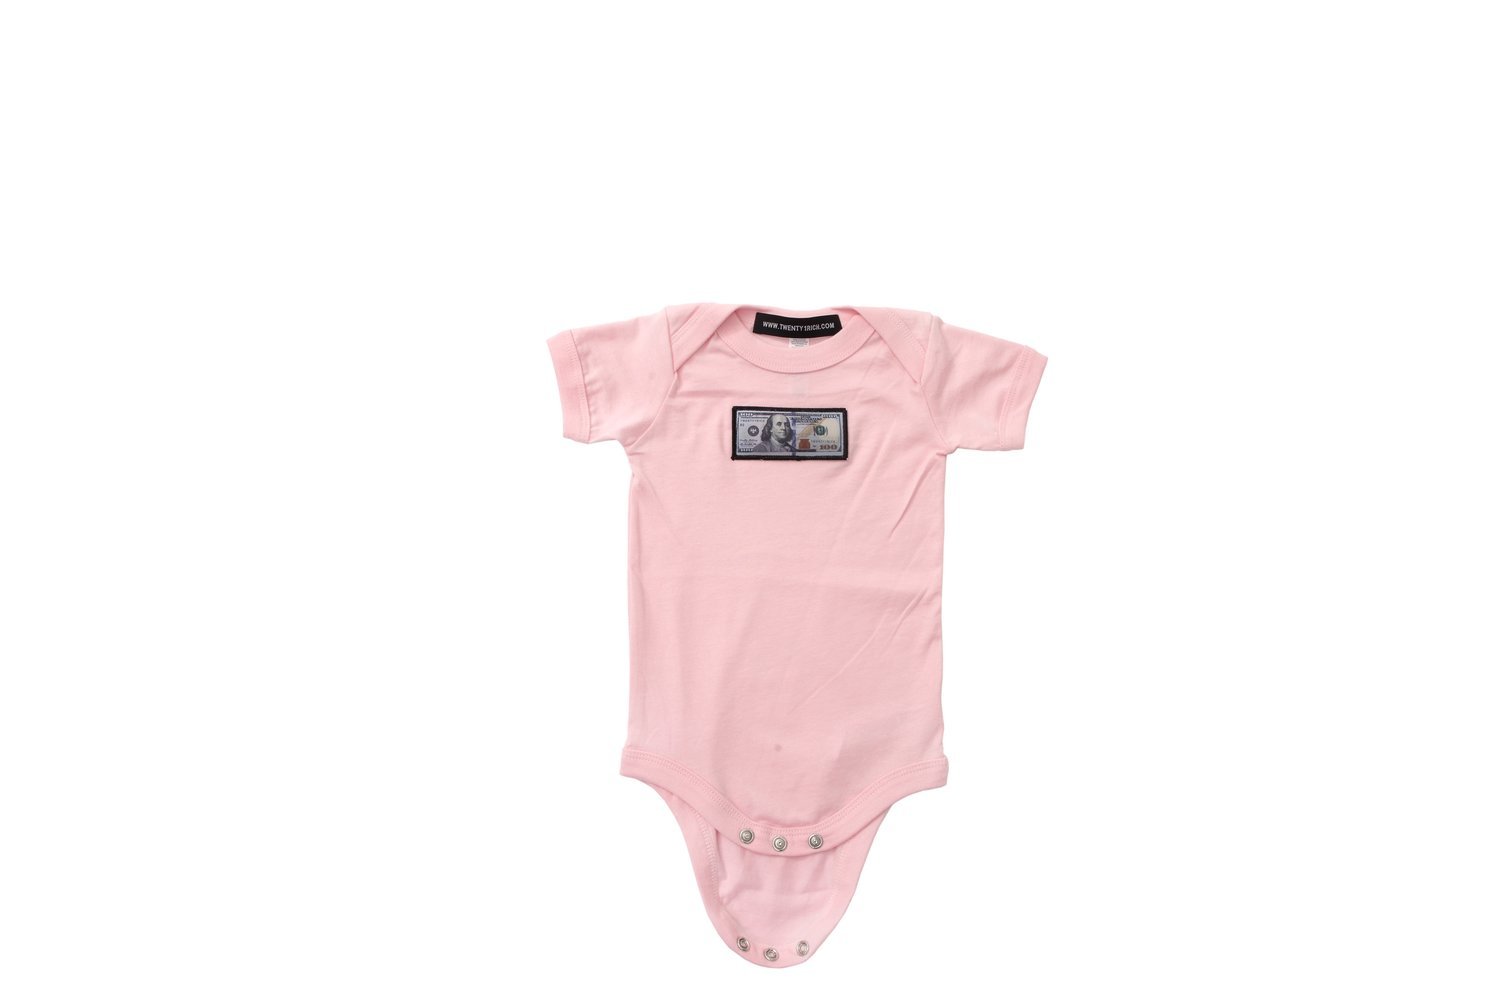 Pink 'Blue Hundreds' Baby Onesie by Twenty1Rich with a $100 logo